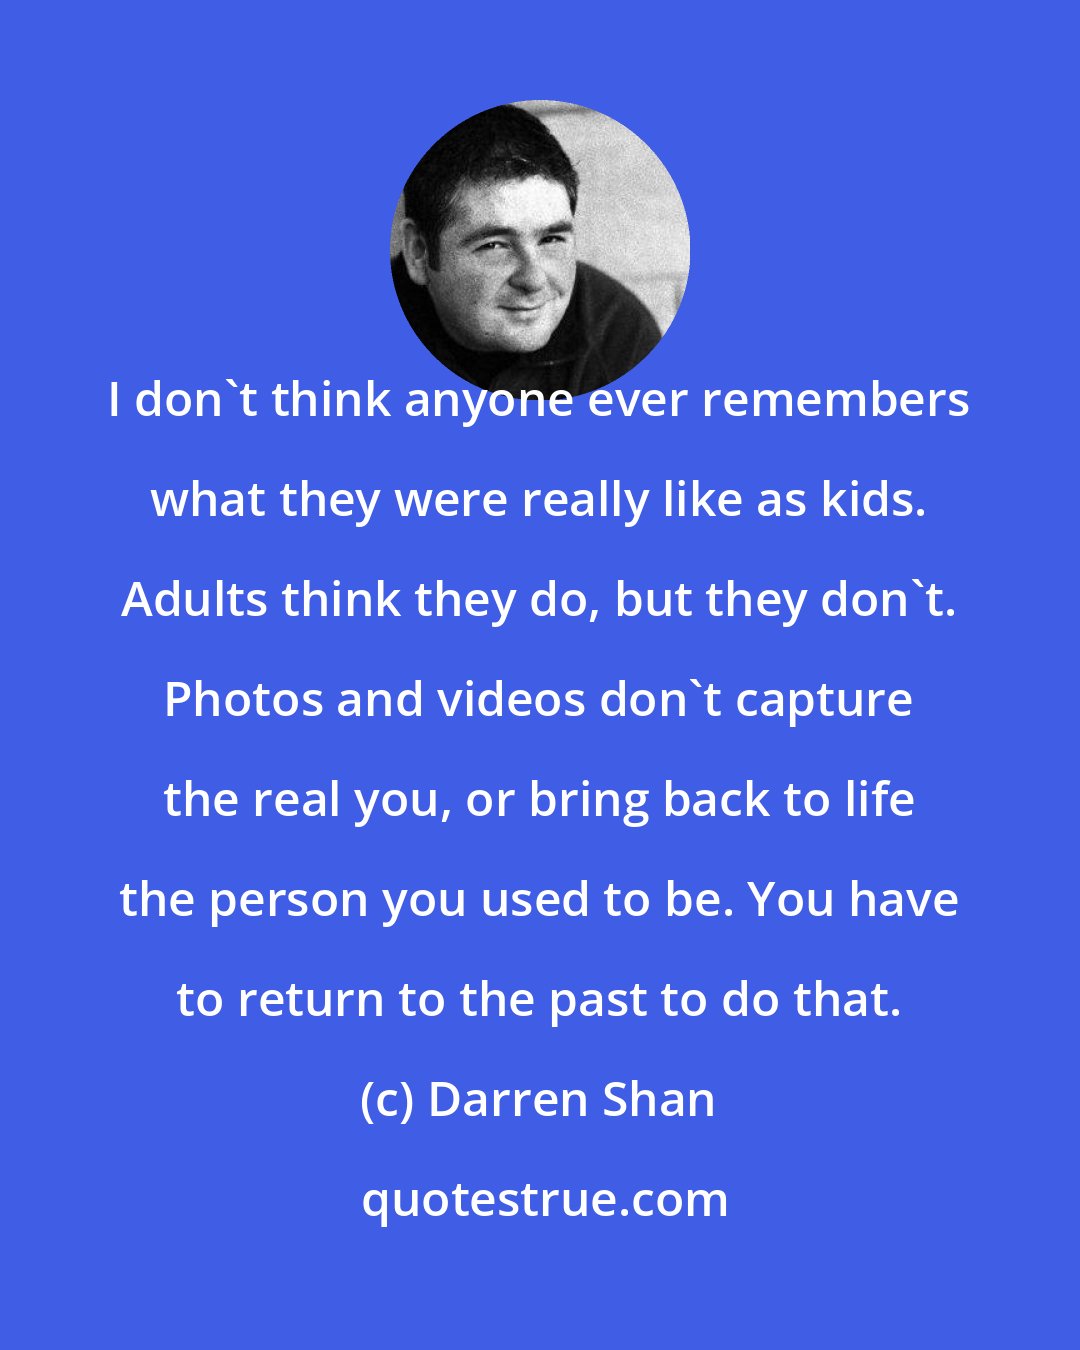 Darren Shan: I don't think anyone ever remembers what they were really like as kids. Adults think they do, but they don't. Photos and videos don't capture the real you, or bring back to life the person you used to be. You have to return to the past to do that.